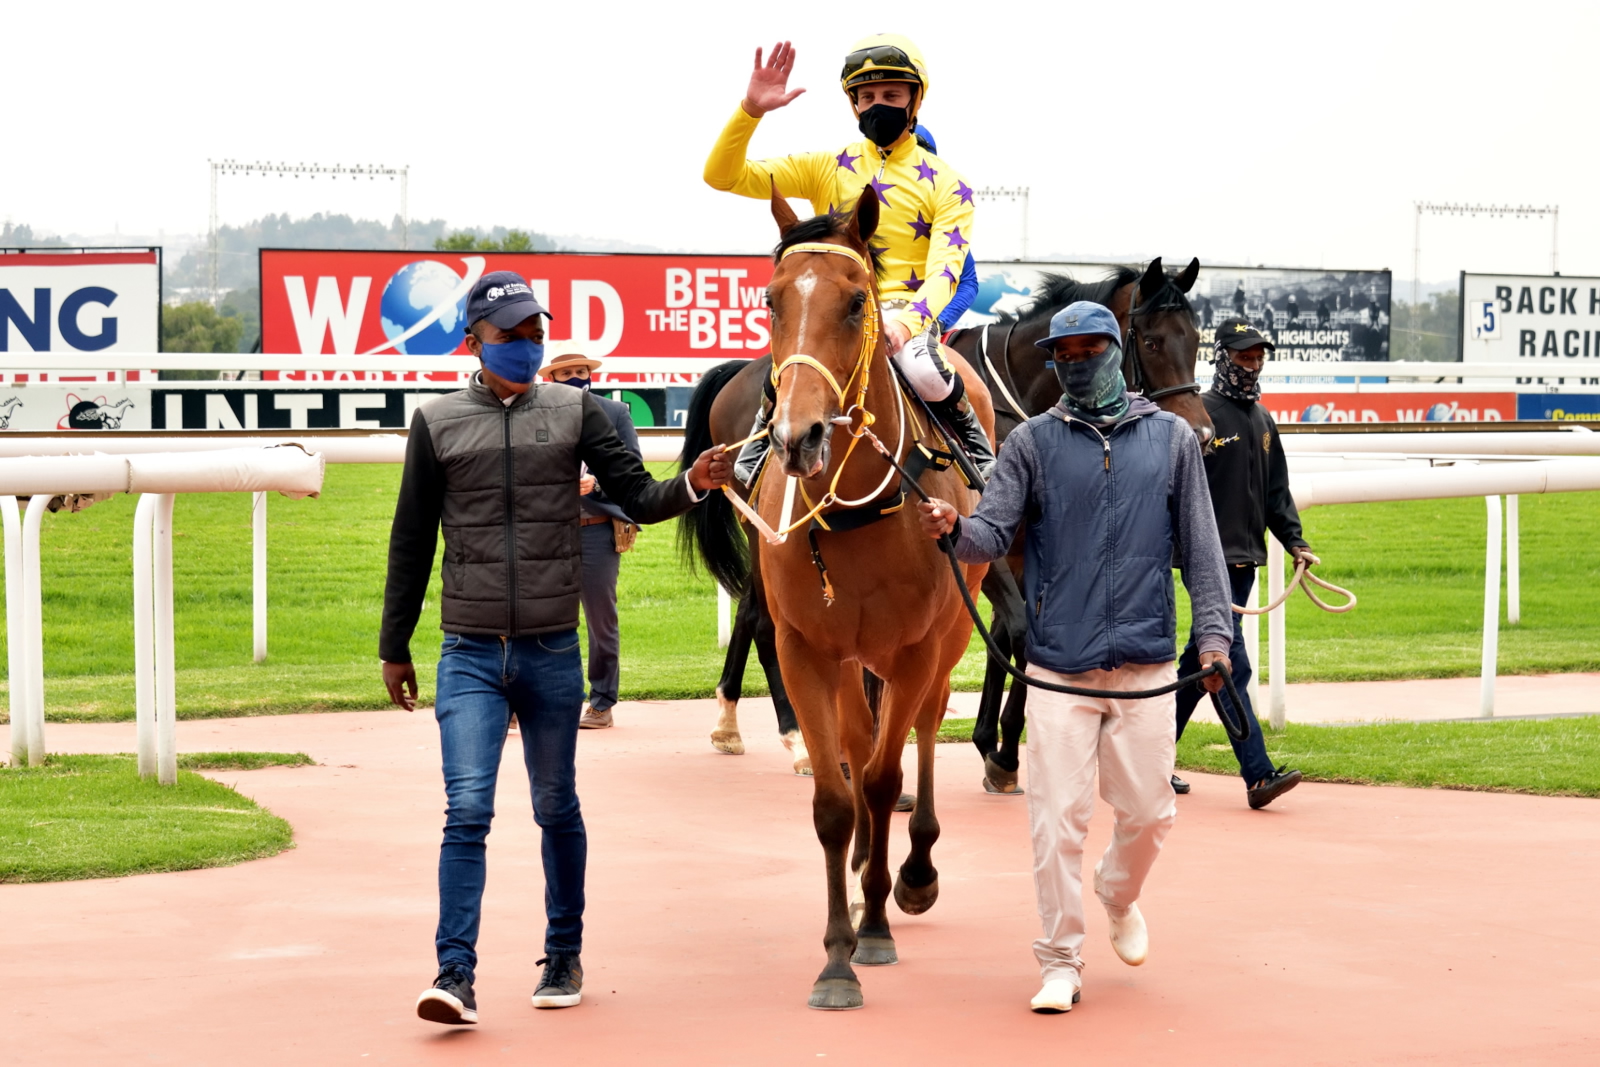 Horse being led in at Turffontein